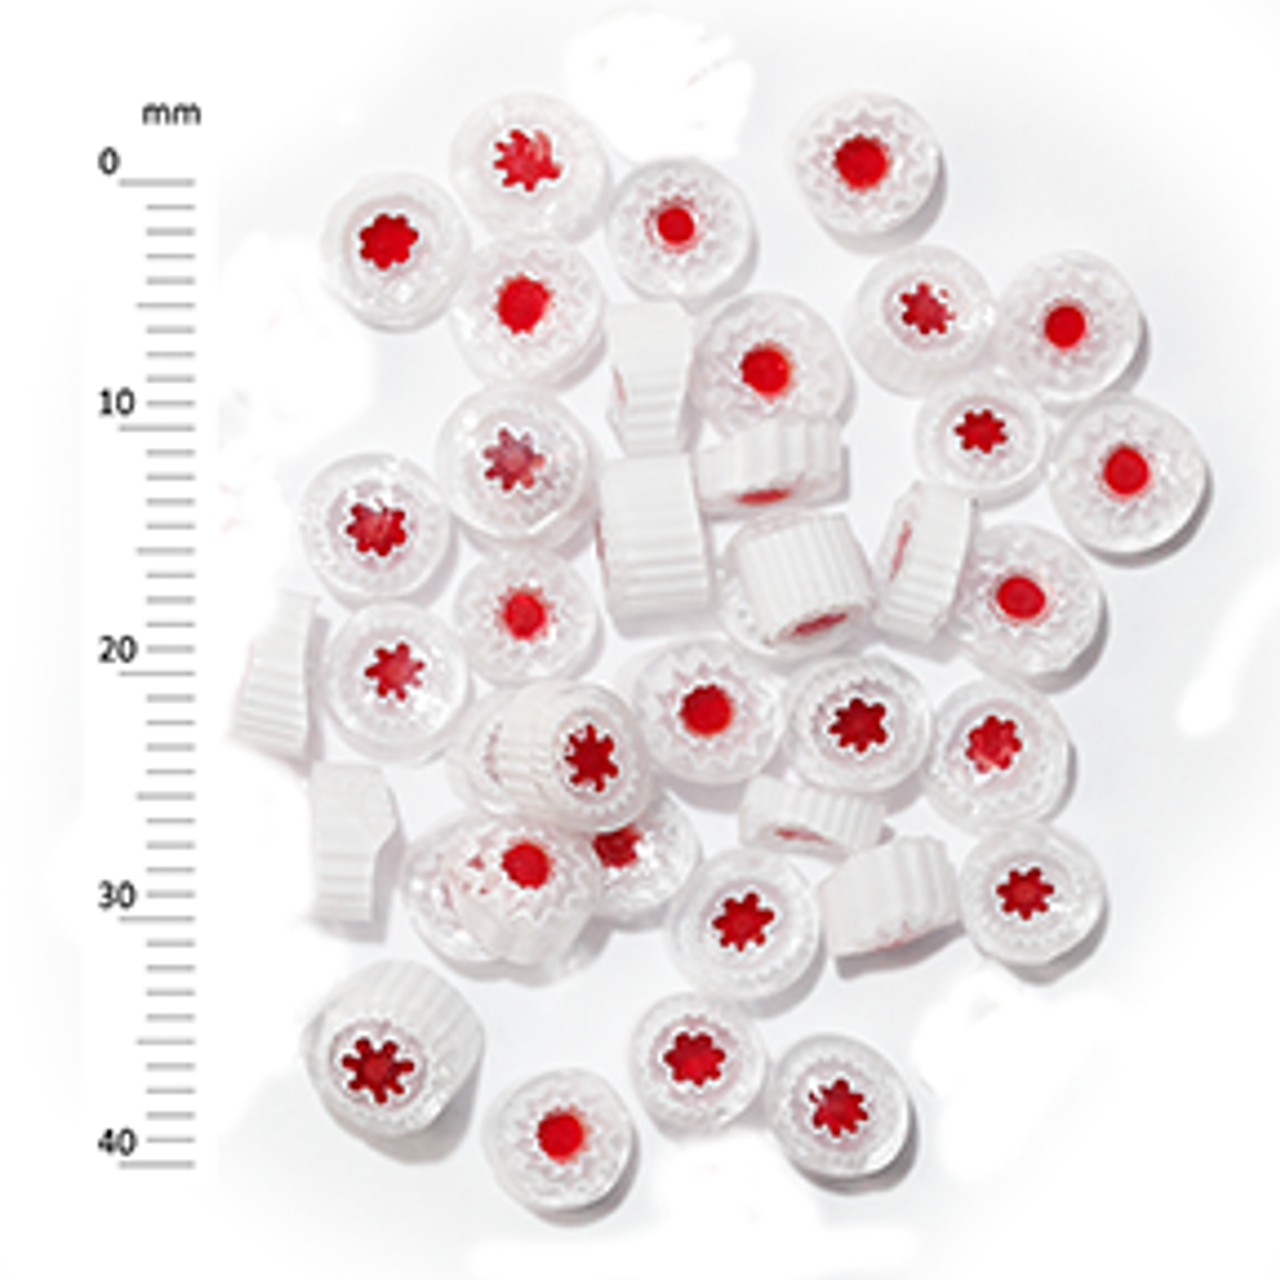 Millefiori - 50g pack (M039), white and red, 5-6mm